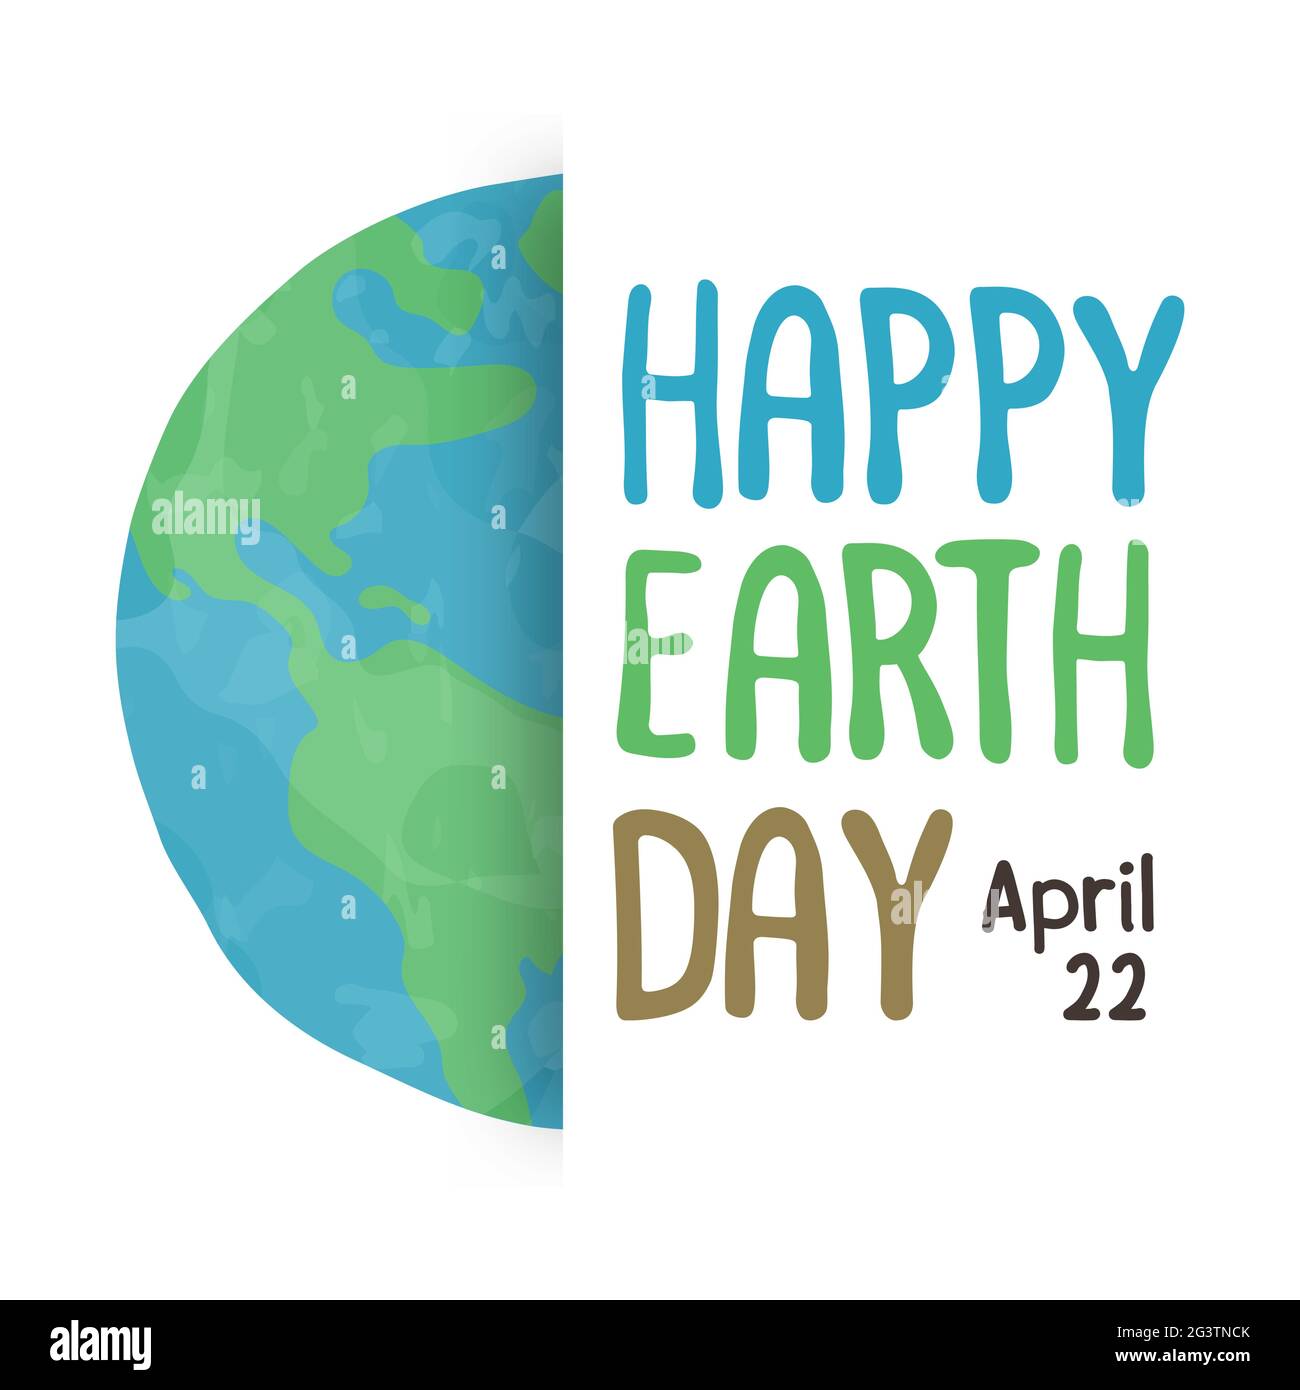 Happy Earth Day lettering greeting card illustration of green watercolor world with typography quote. Environment care holiday banner for april 22. Stock Vector